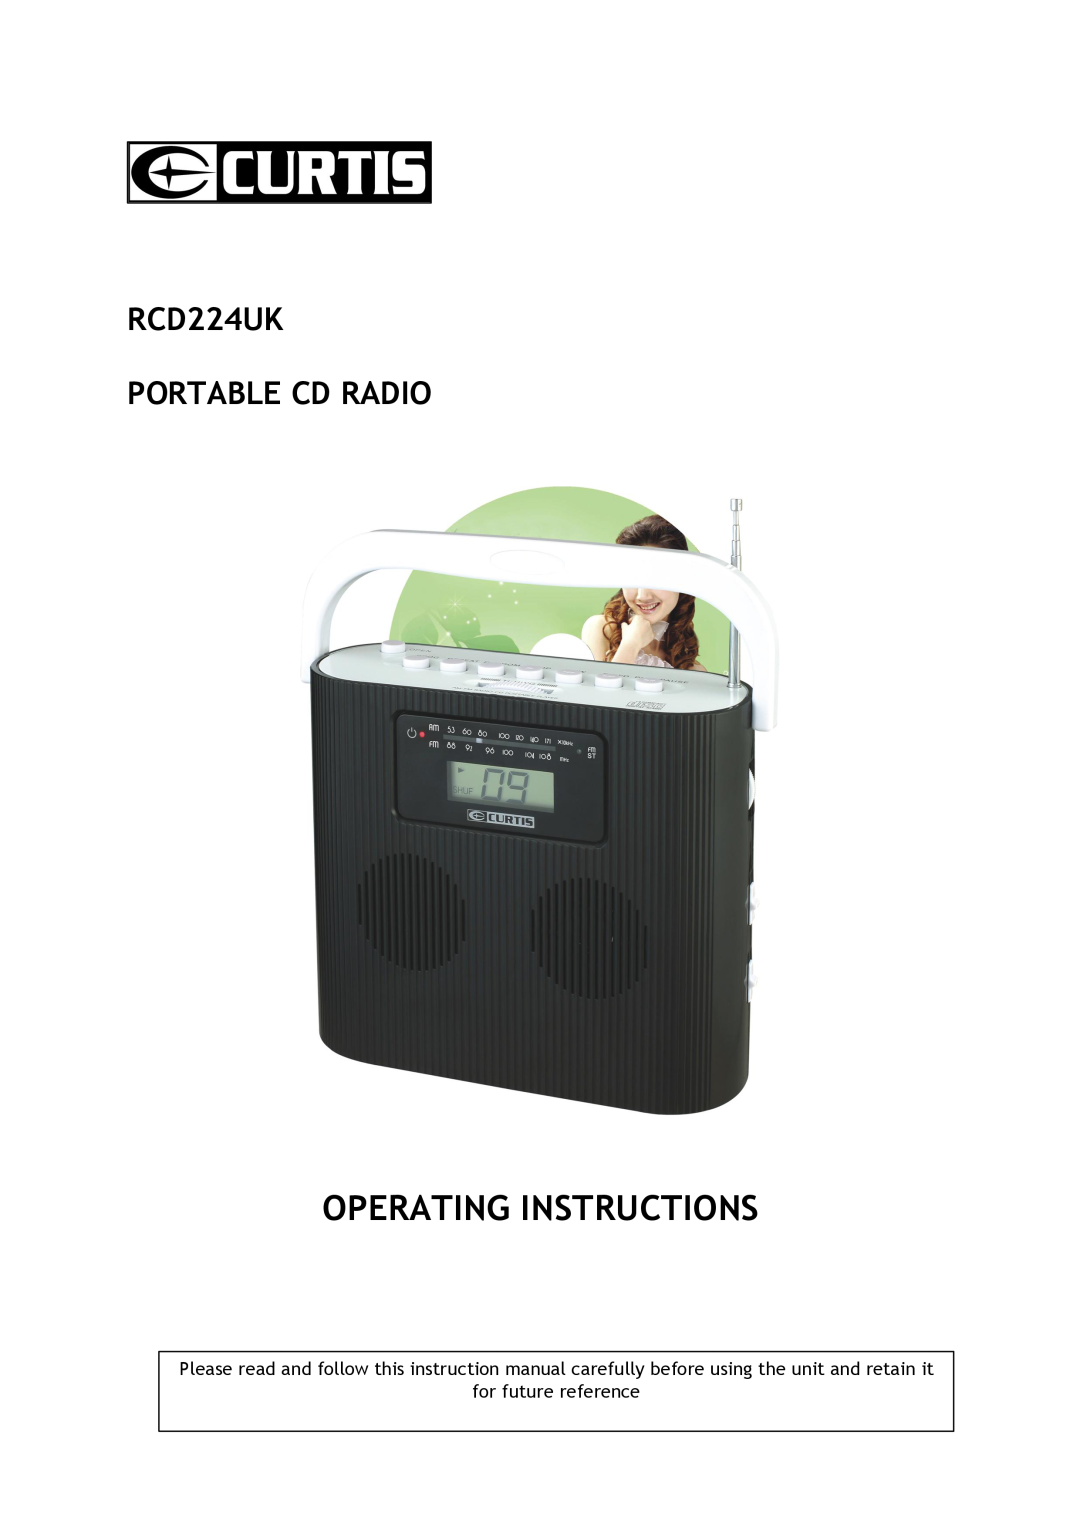 Curtis operating instructions Operating Instructions, RCD224UK PORTABLE CD RADIO, for future reference 